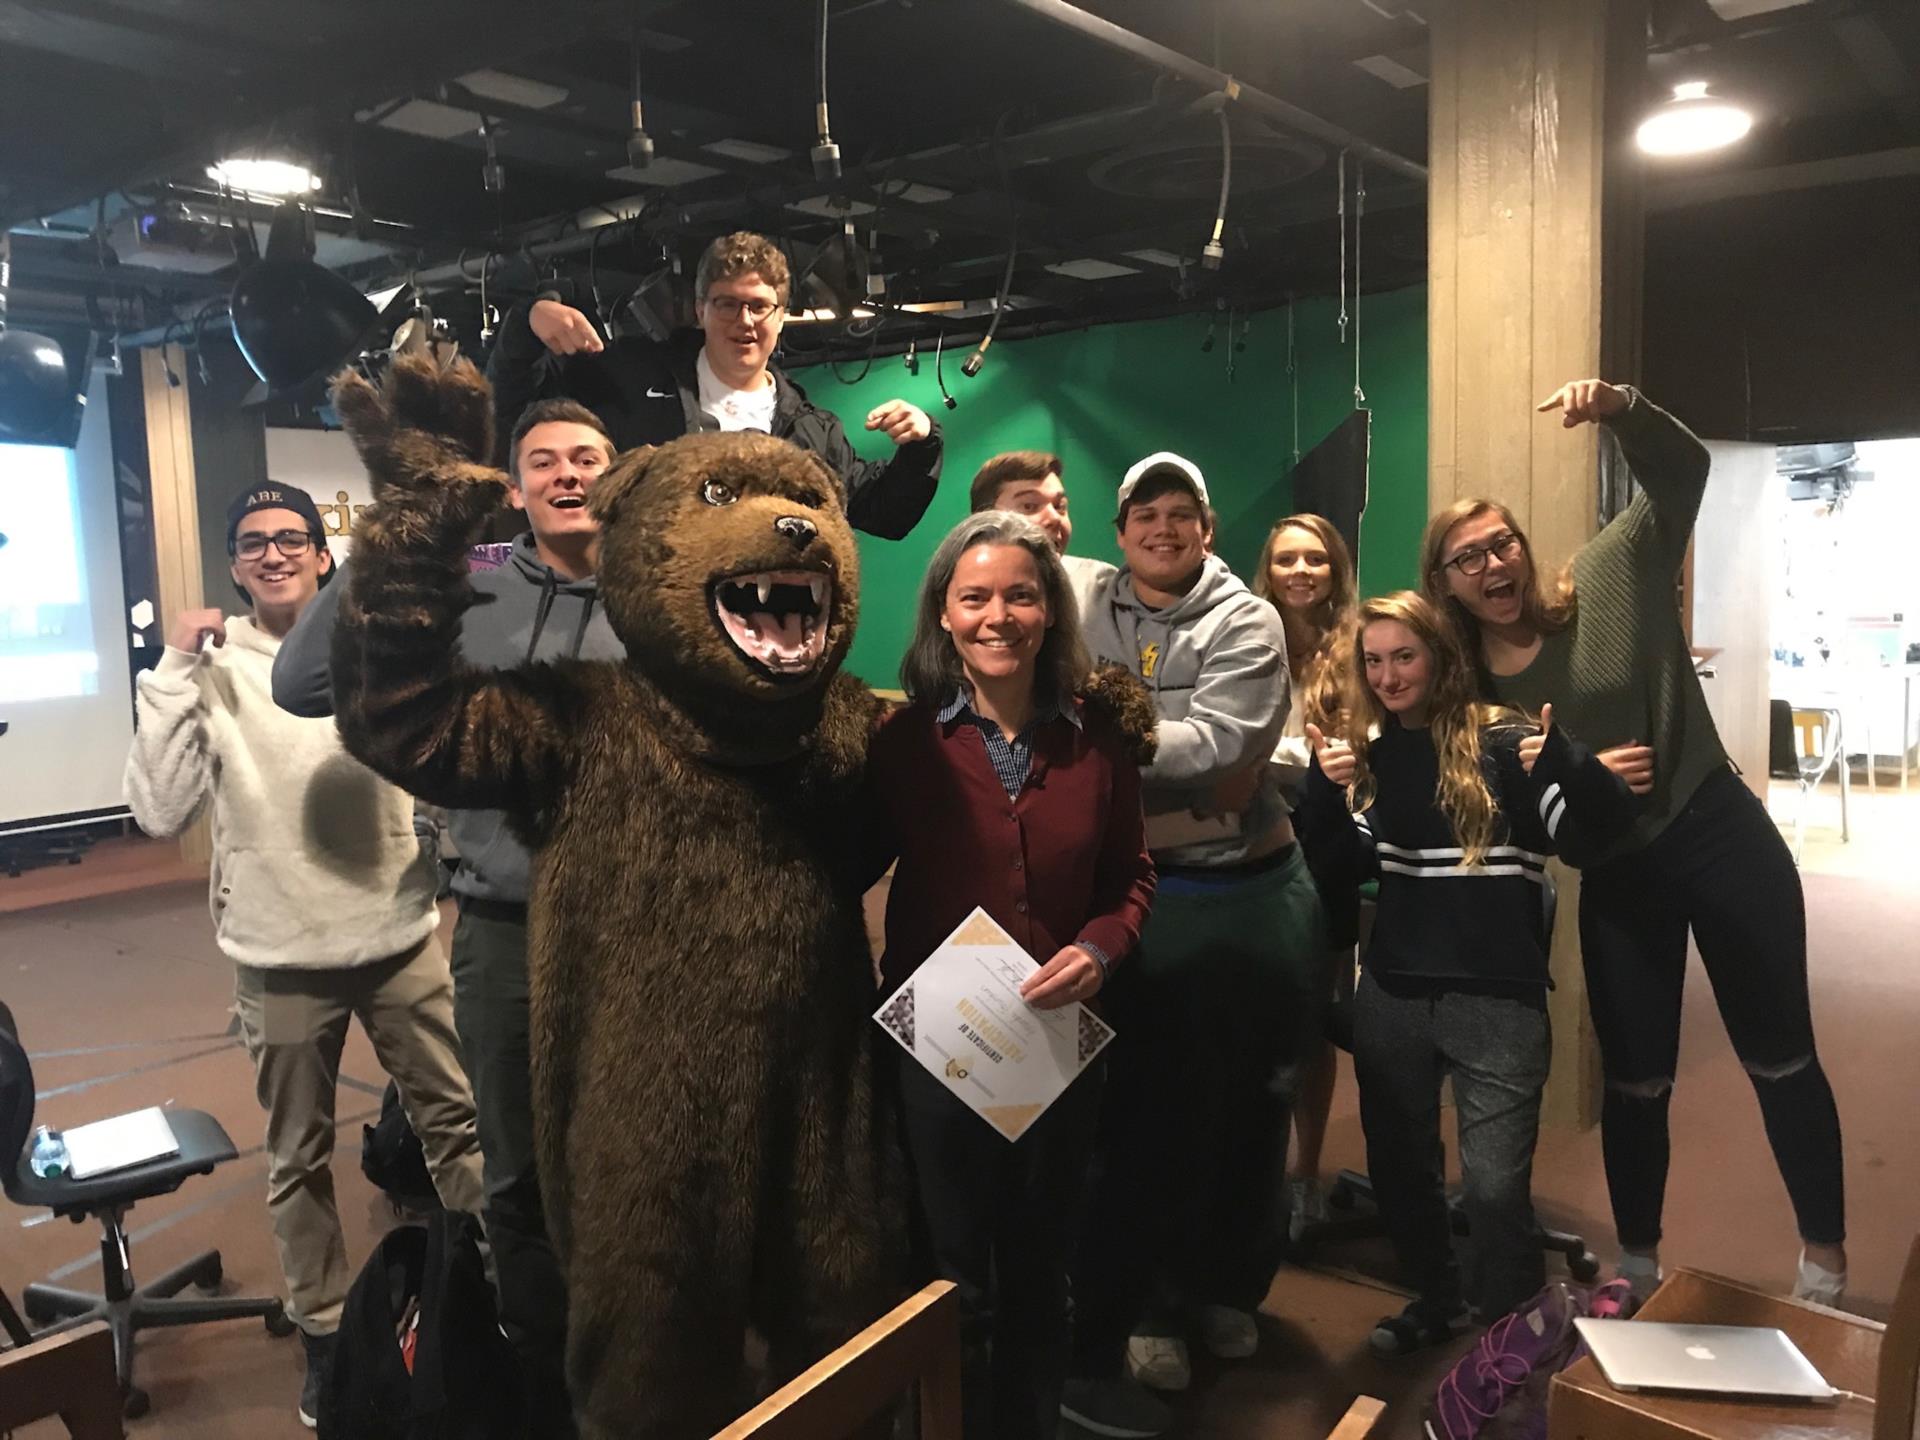 Students celebrating with a teacher and the bear mascot for Idea Hunt